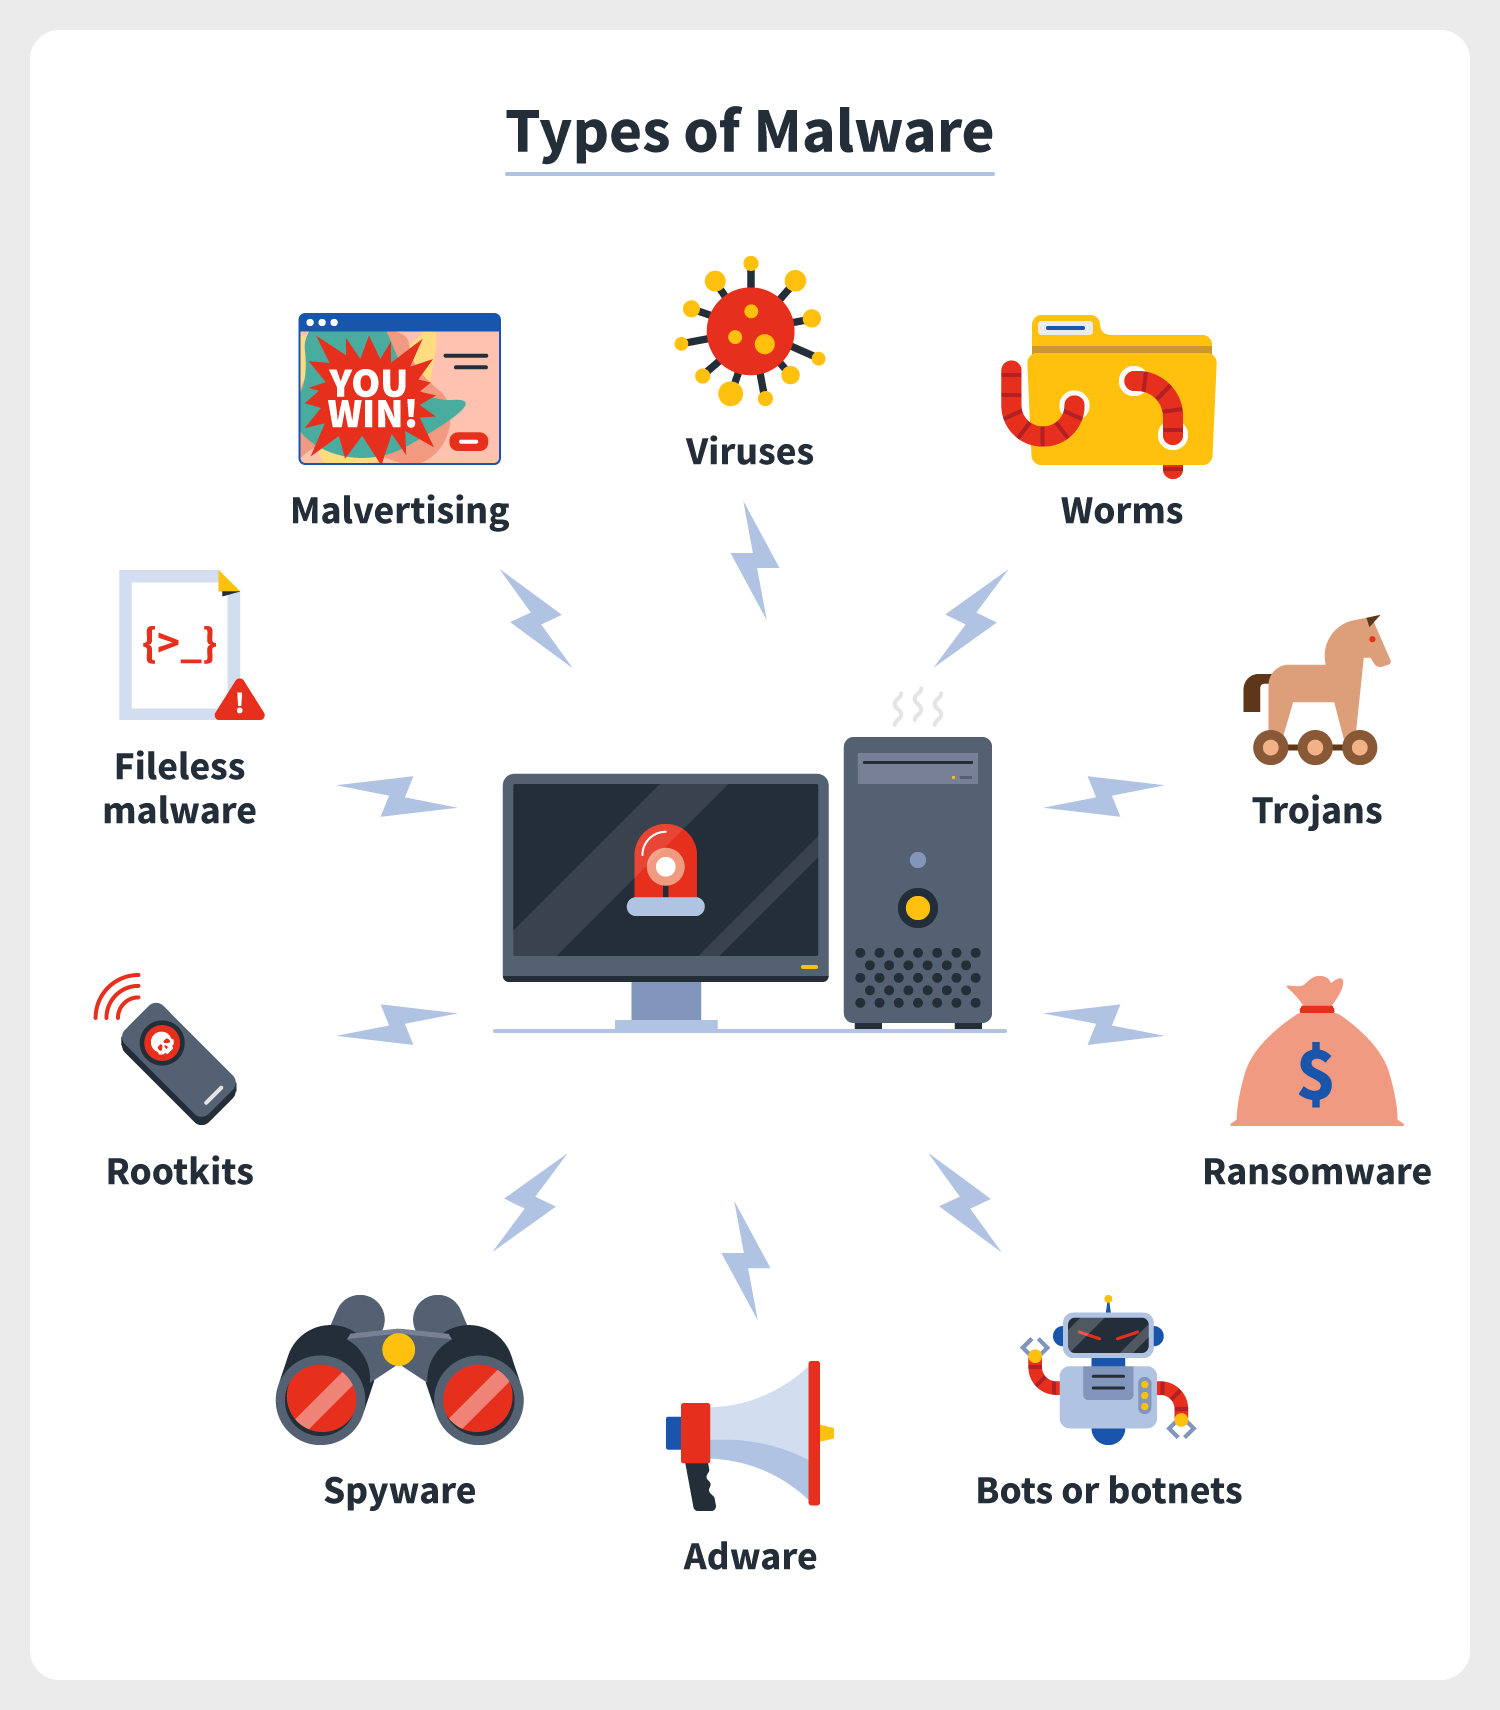 a desktop computer screen shows a red siren and is surrounded by icons that represent types of malware that could be potentially infecting the device